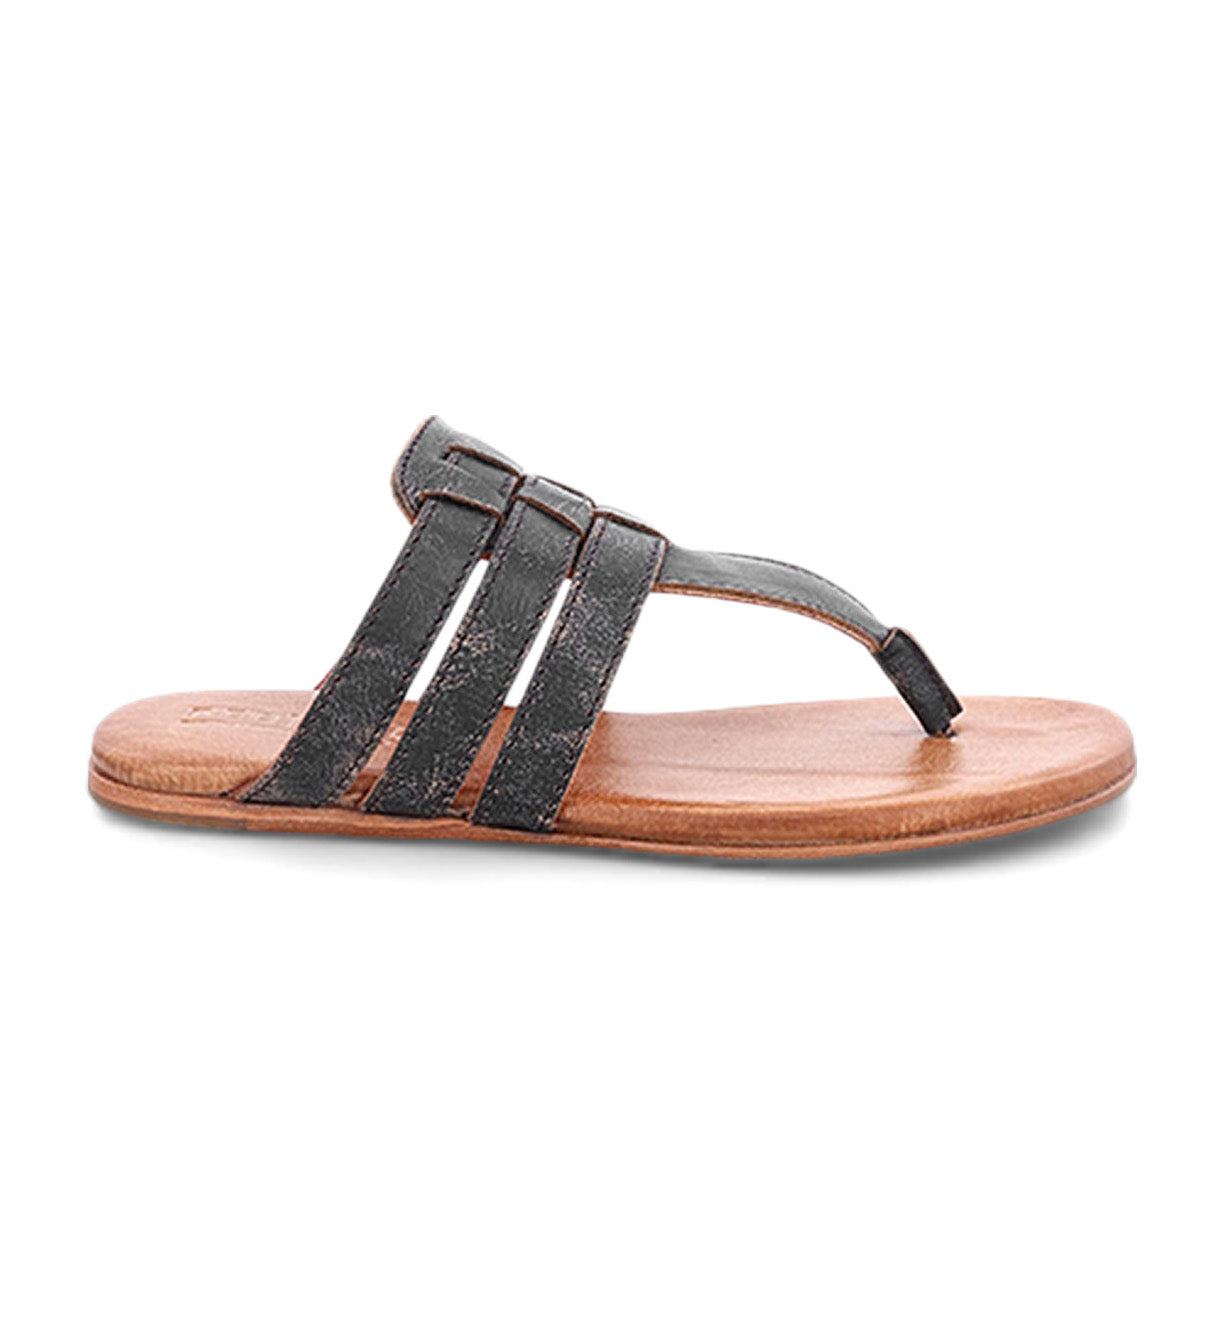 A women's black Yoli sandal with straps from Bed Stu.